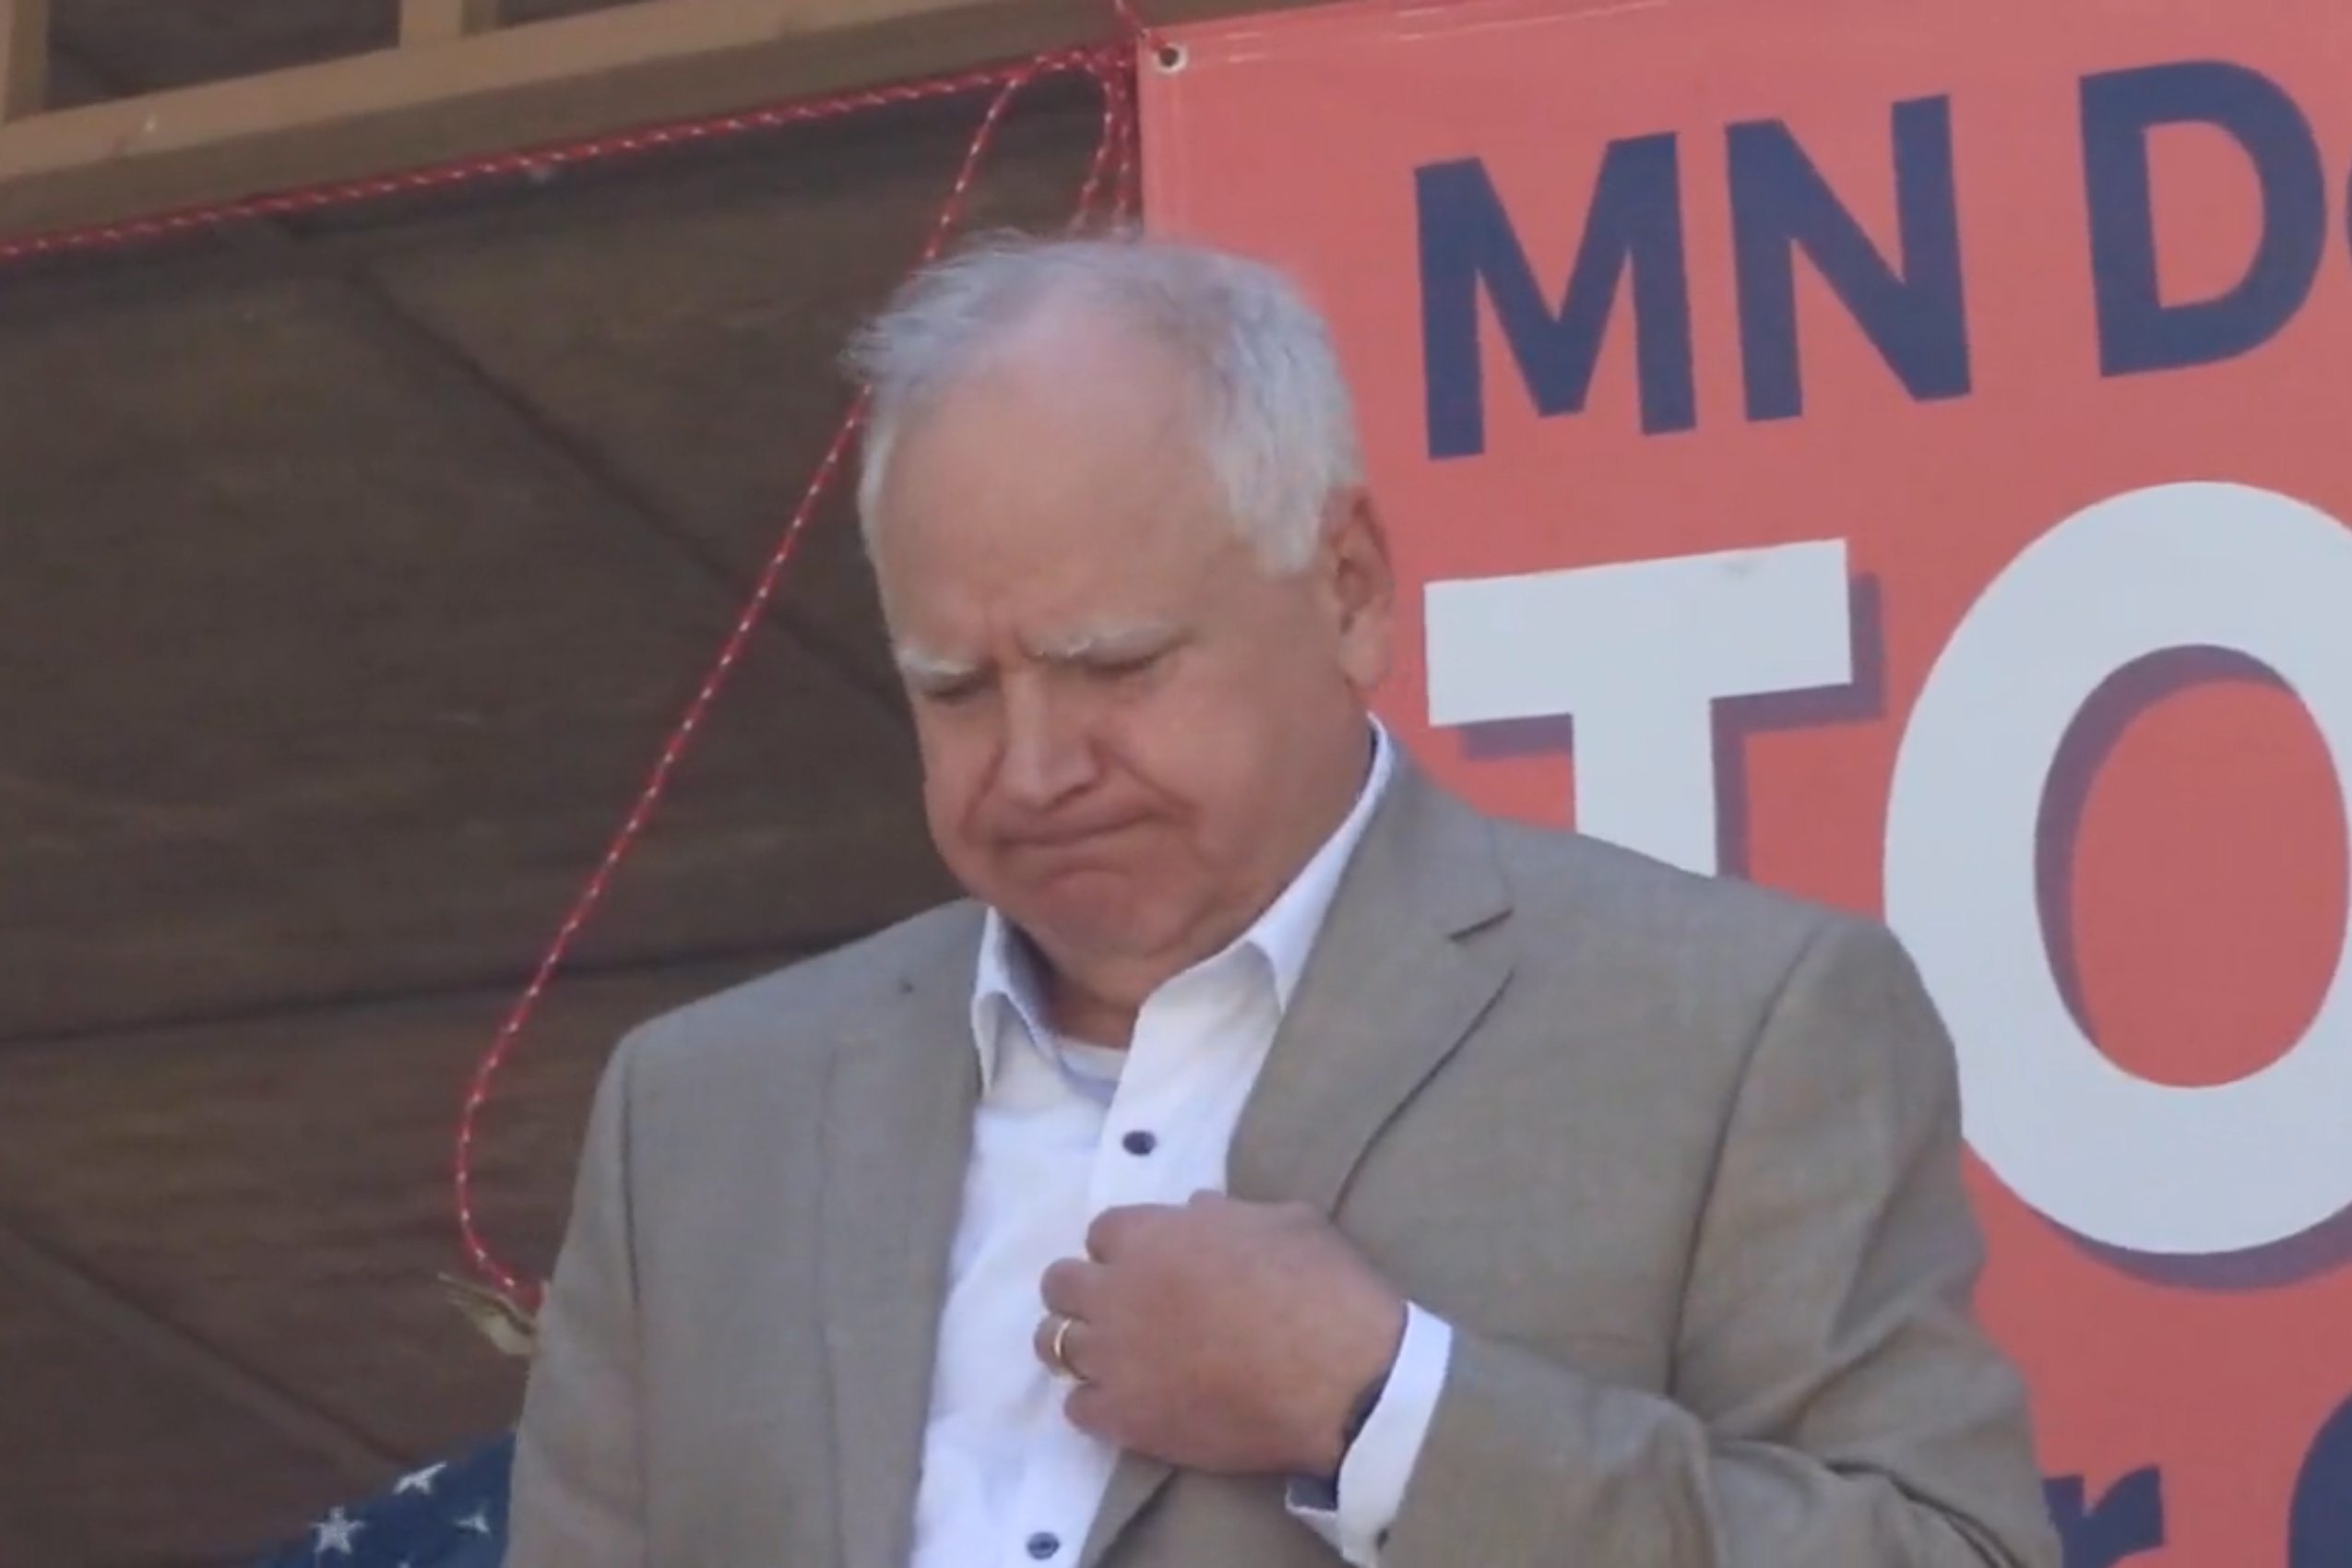 Walz looks dismayed on stage at Saturday's event. (Twitter/Screenshot)